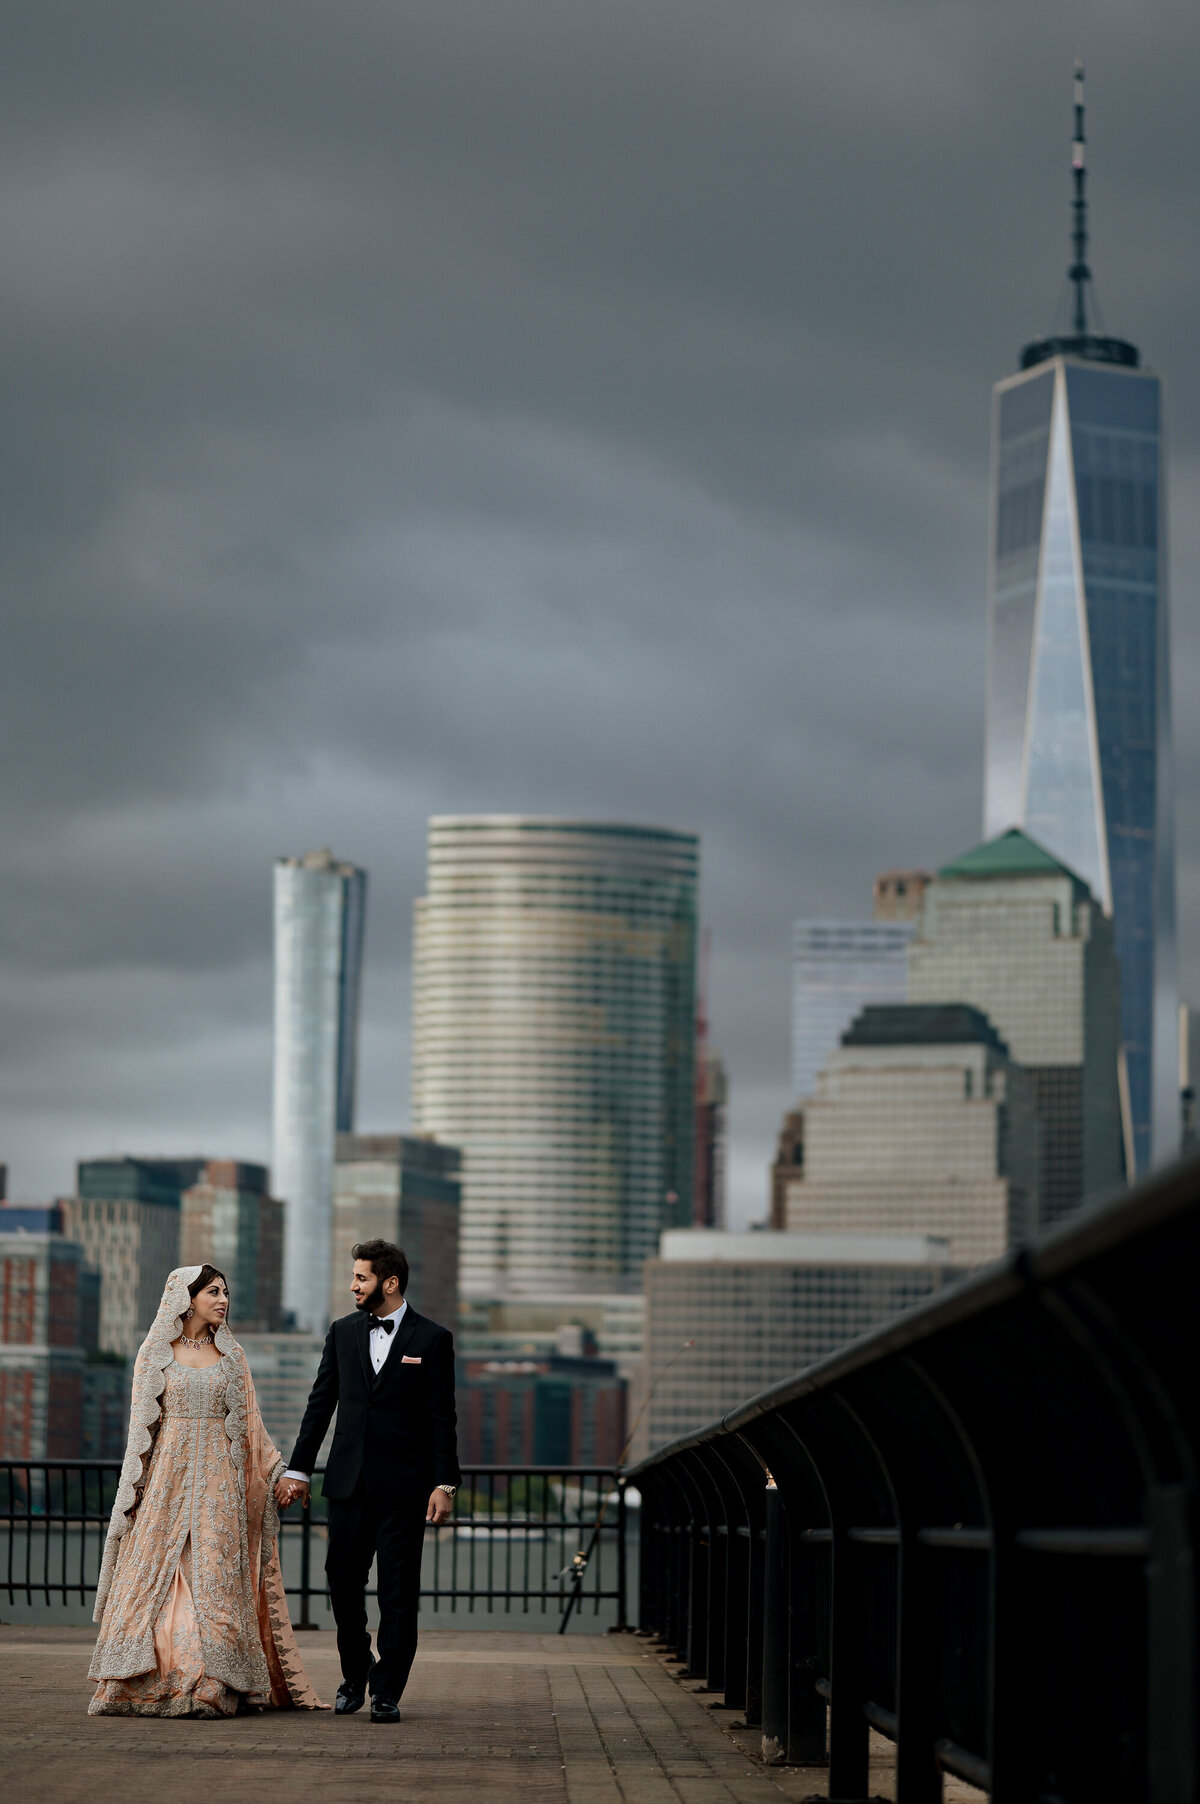 NYC photographer ready to capture your destination wedding.